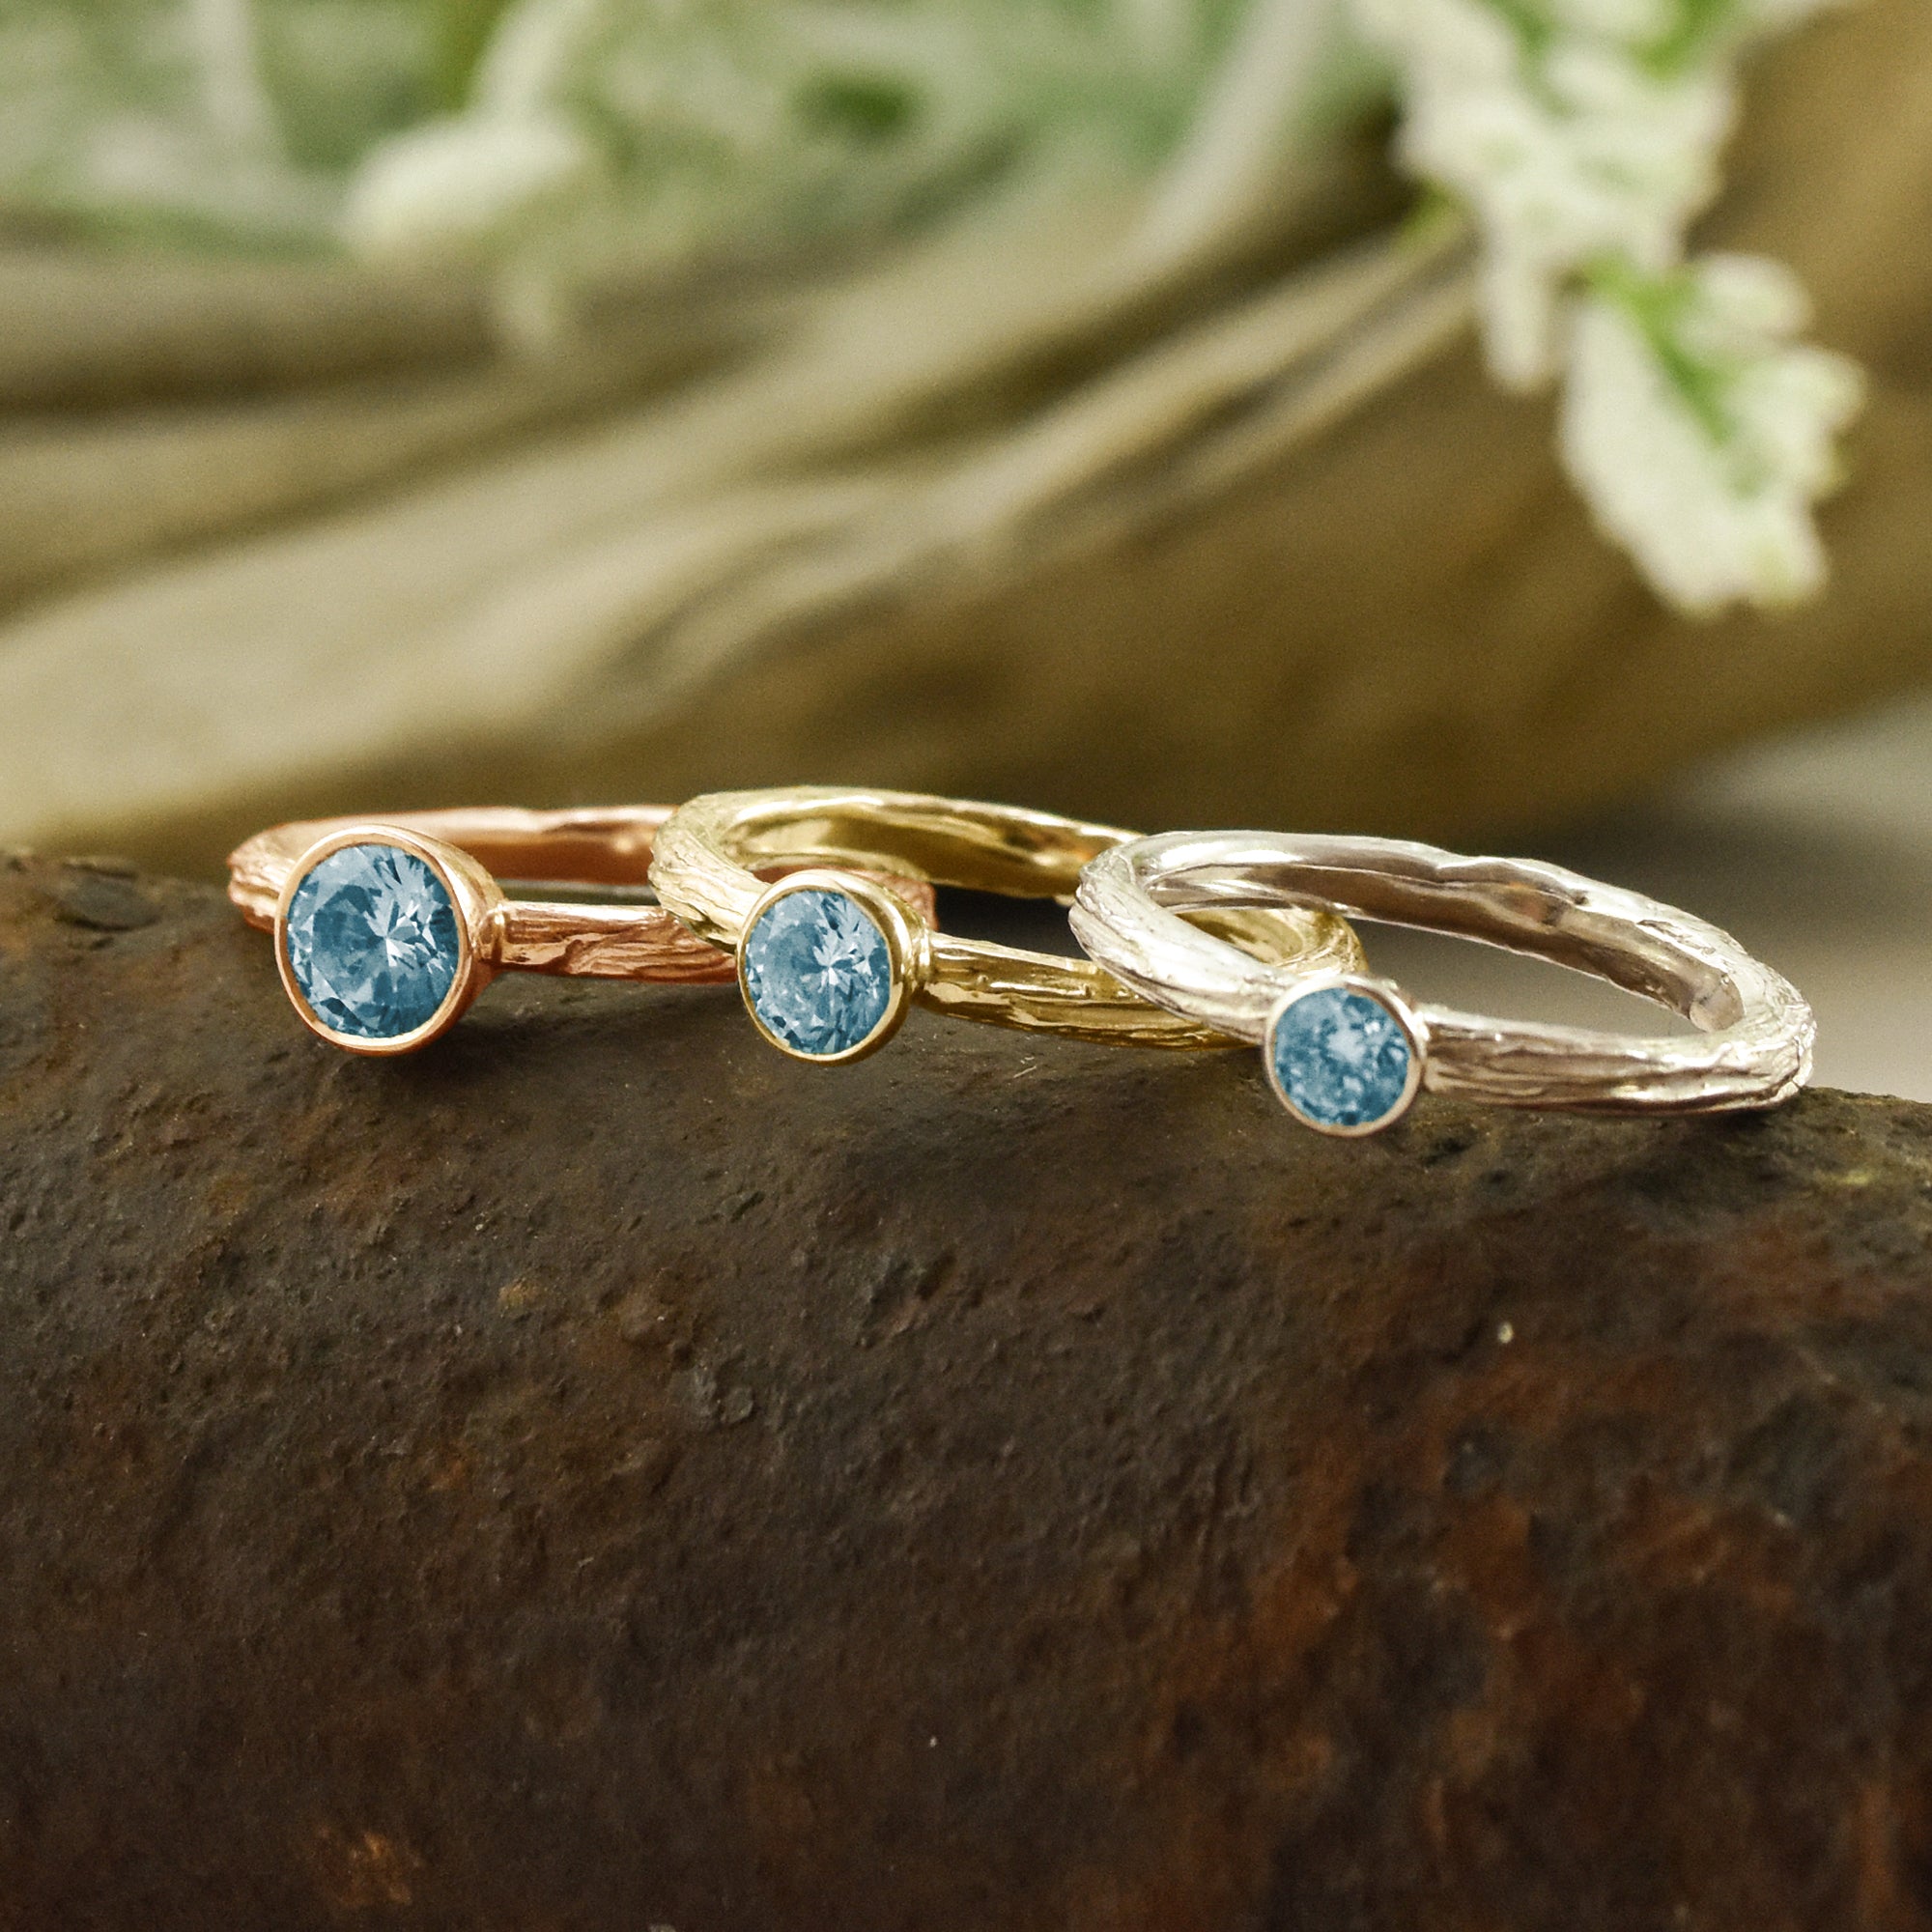 Sapphire handcrafted at Beth Millner Jewelry